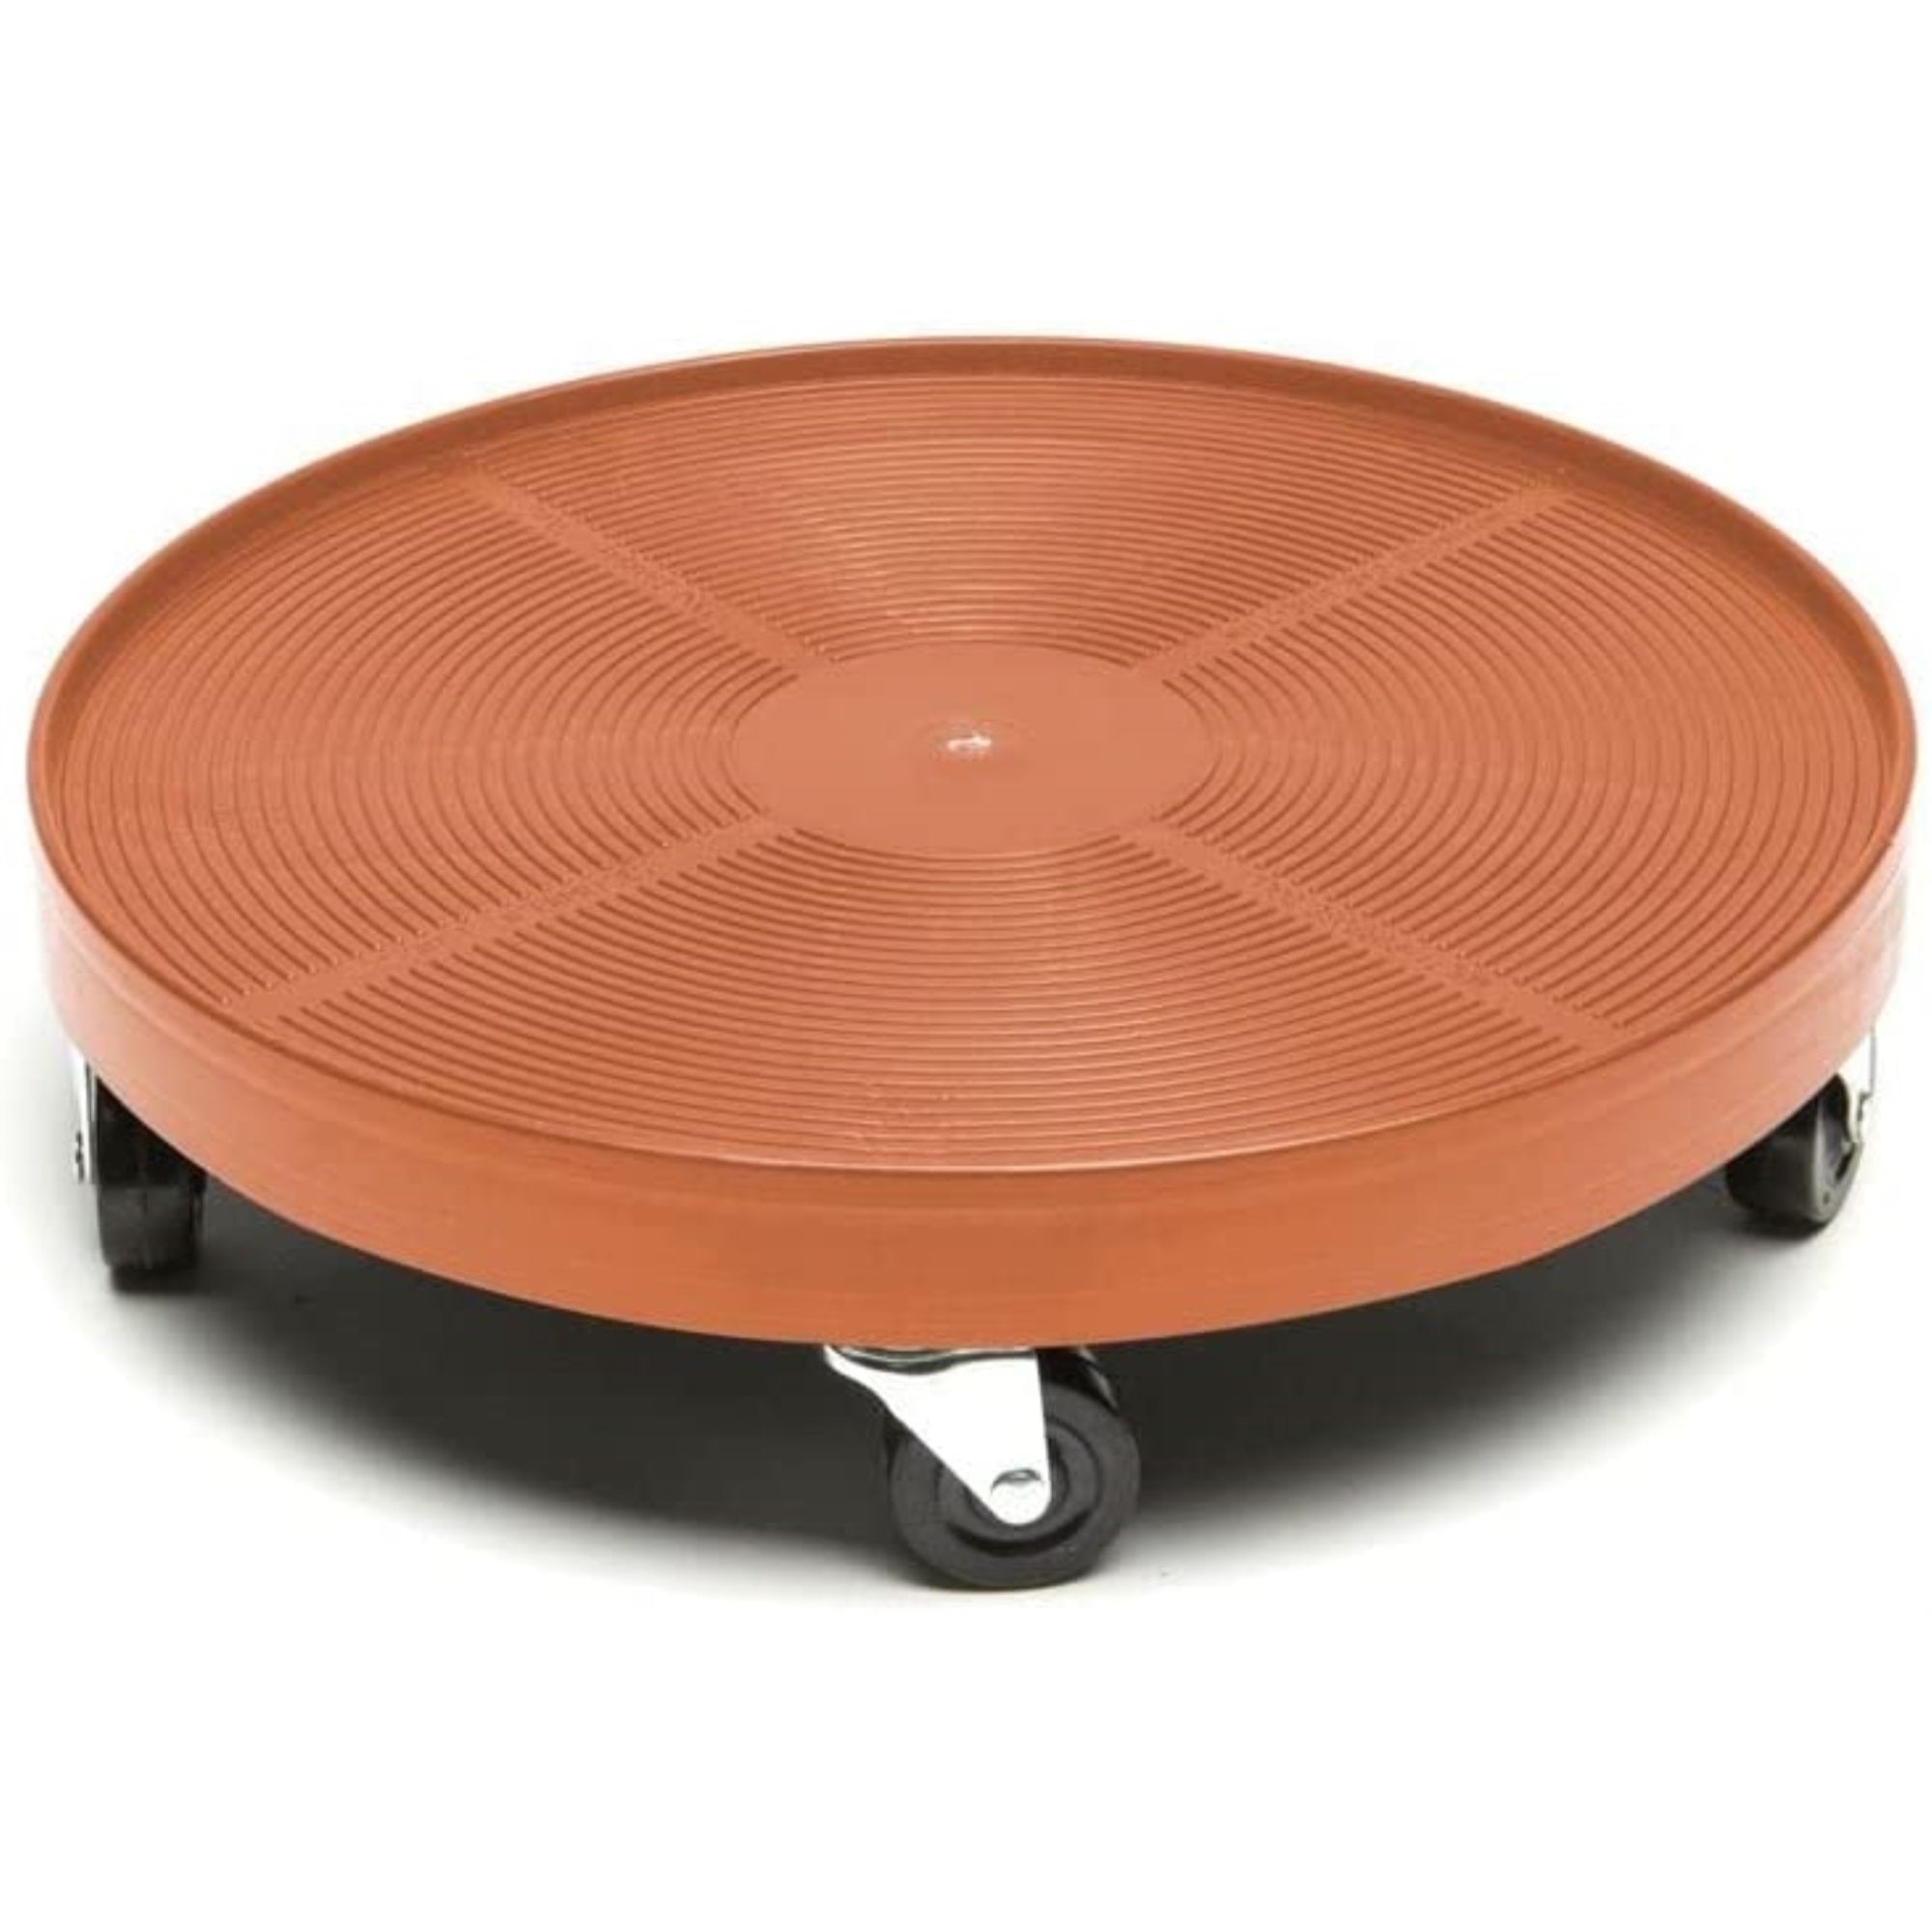 DeVault Durable Circular Plant Dolly Caddy with Wheels, Terra Cotta Color, 16"